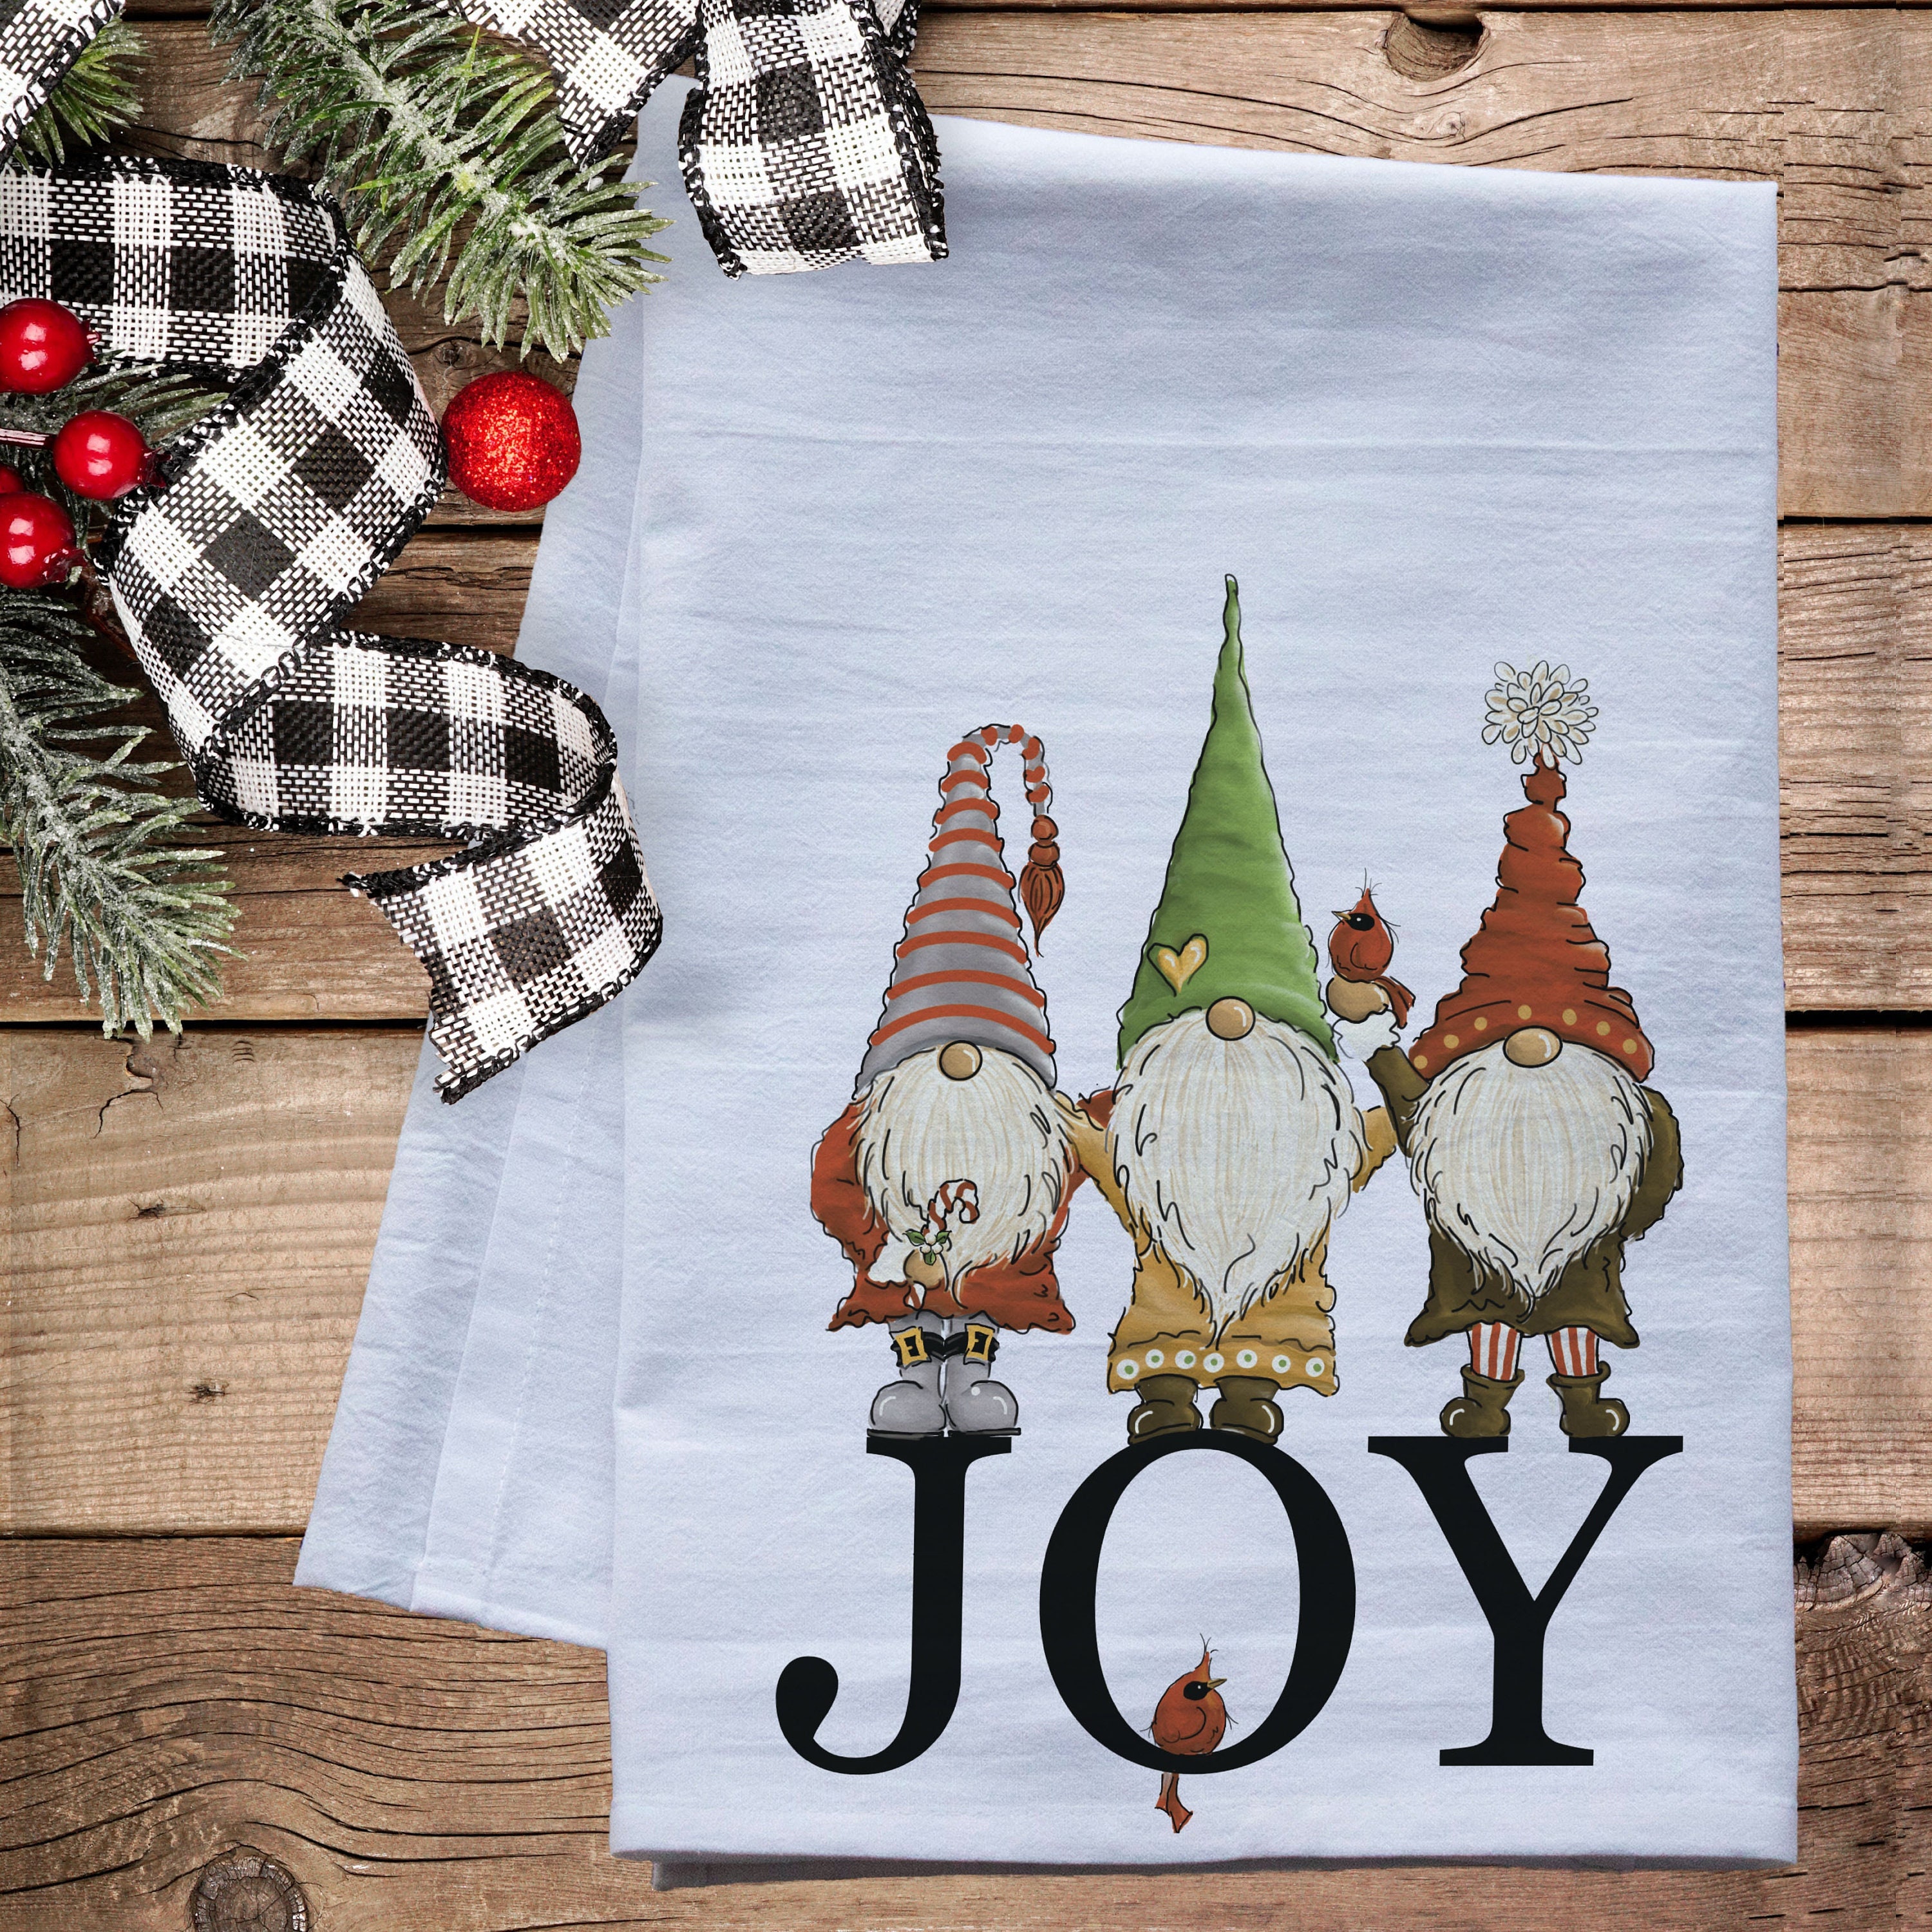 Gnome with Towel Christmas Towels Gnomen/Decorative Christmas Kitchen Towels/Hand Towels for Bathroom Decorative Set/Christmas Kitchen Decorations